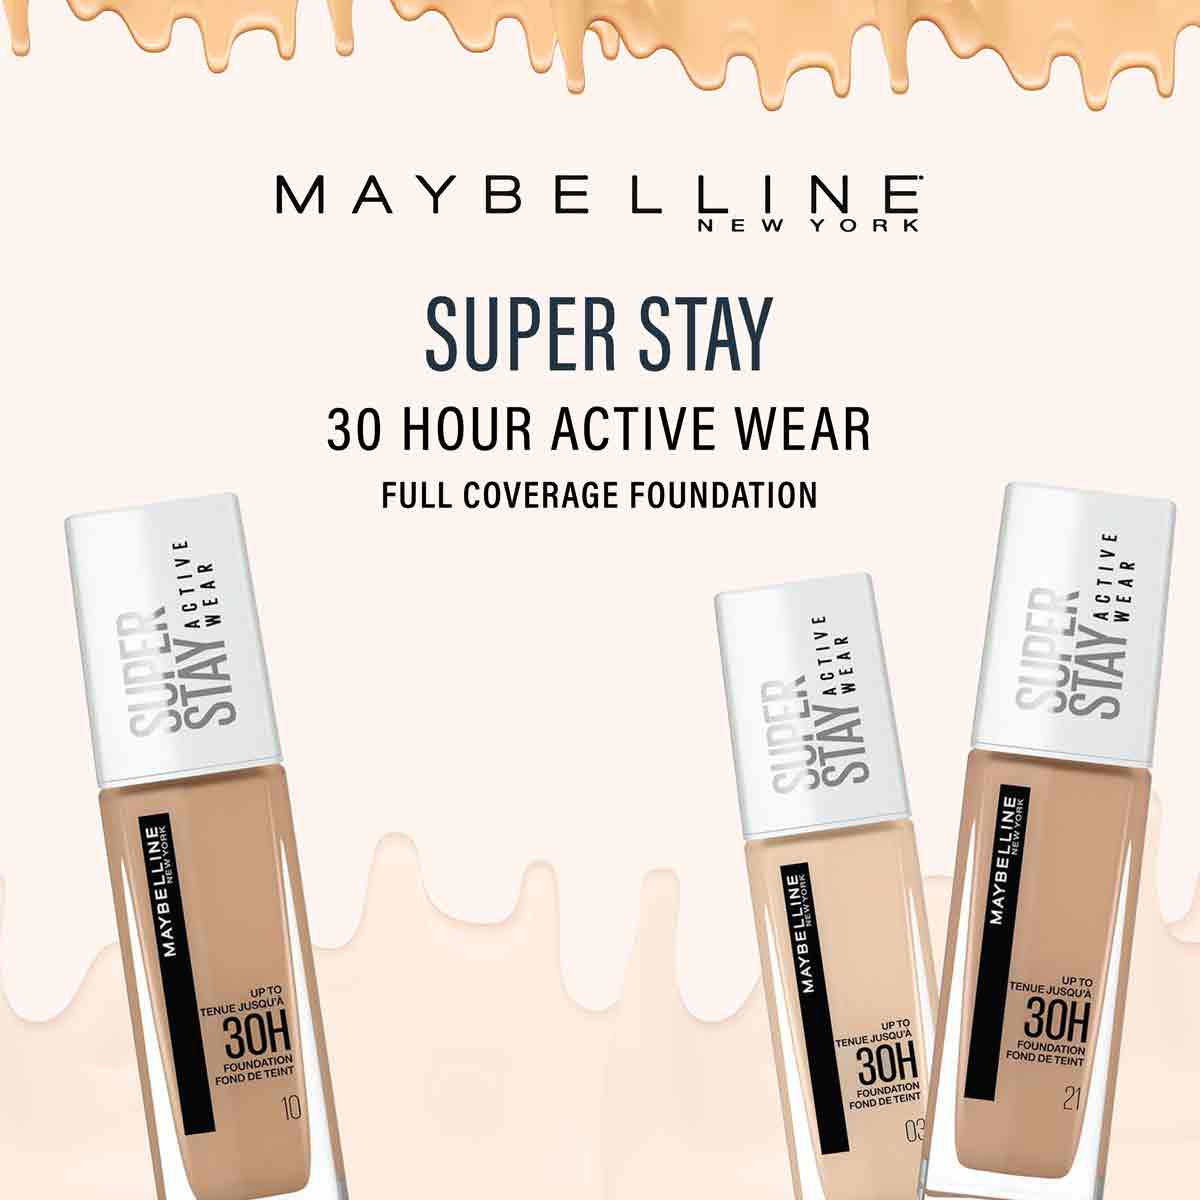 Hour 30 Wear Foundation Active Superstay Maybelline Full Coverage